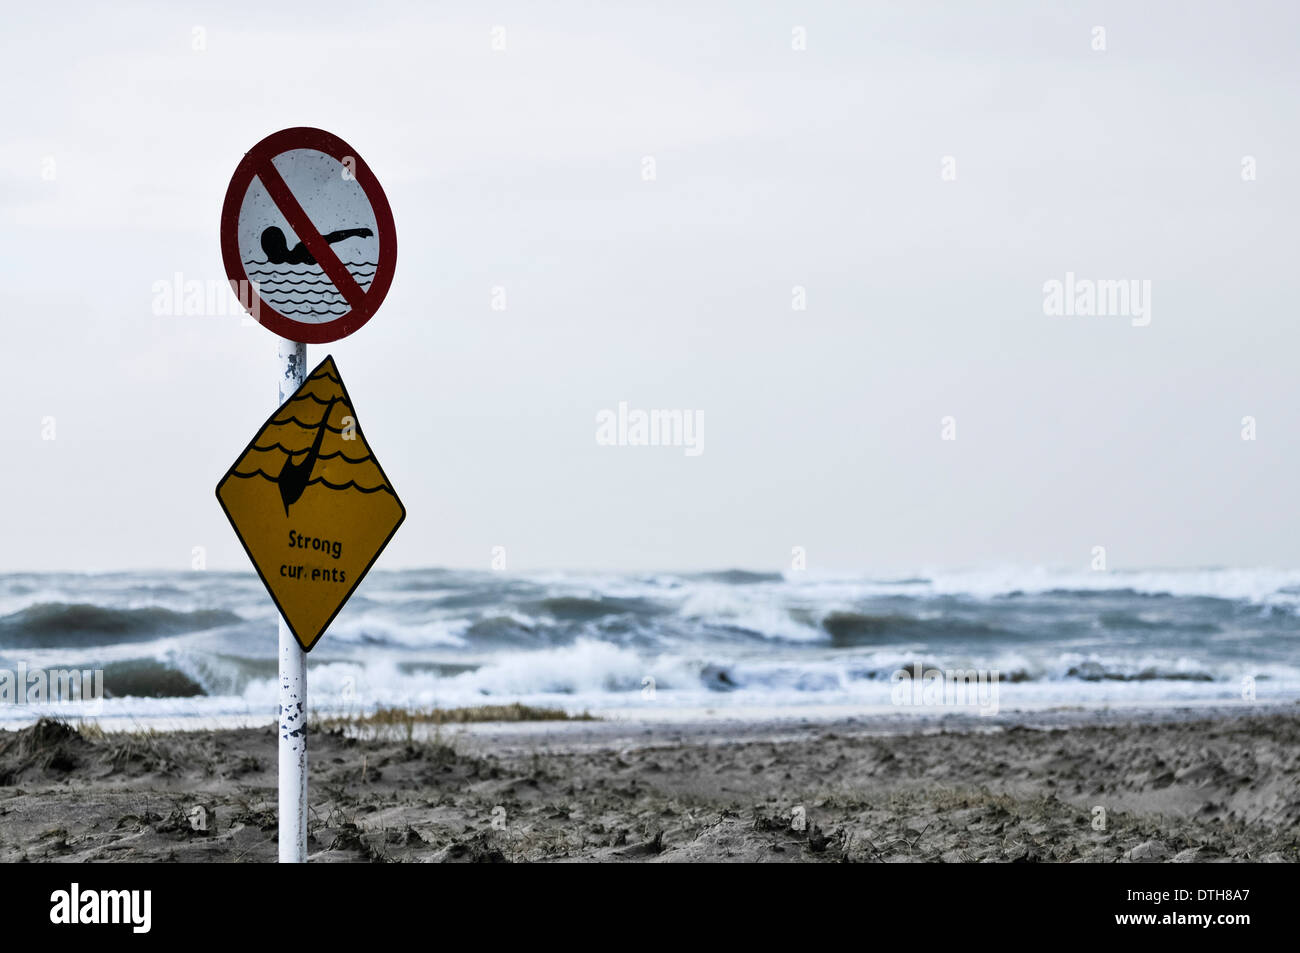 Sign warning of strong currents, and prohibiting swimming against a stormy sea Stock Photo